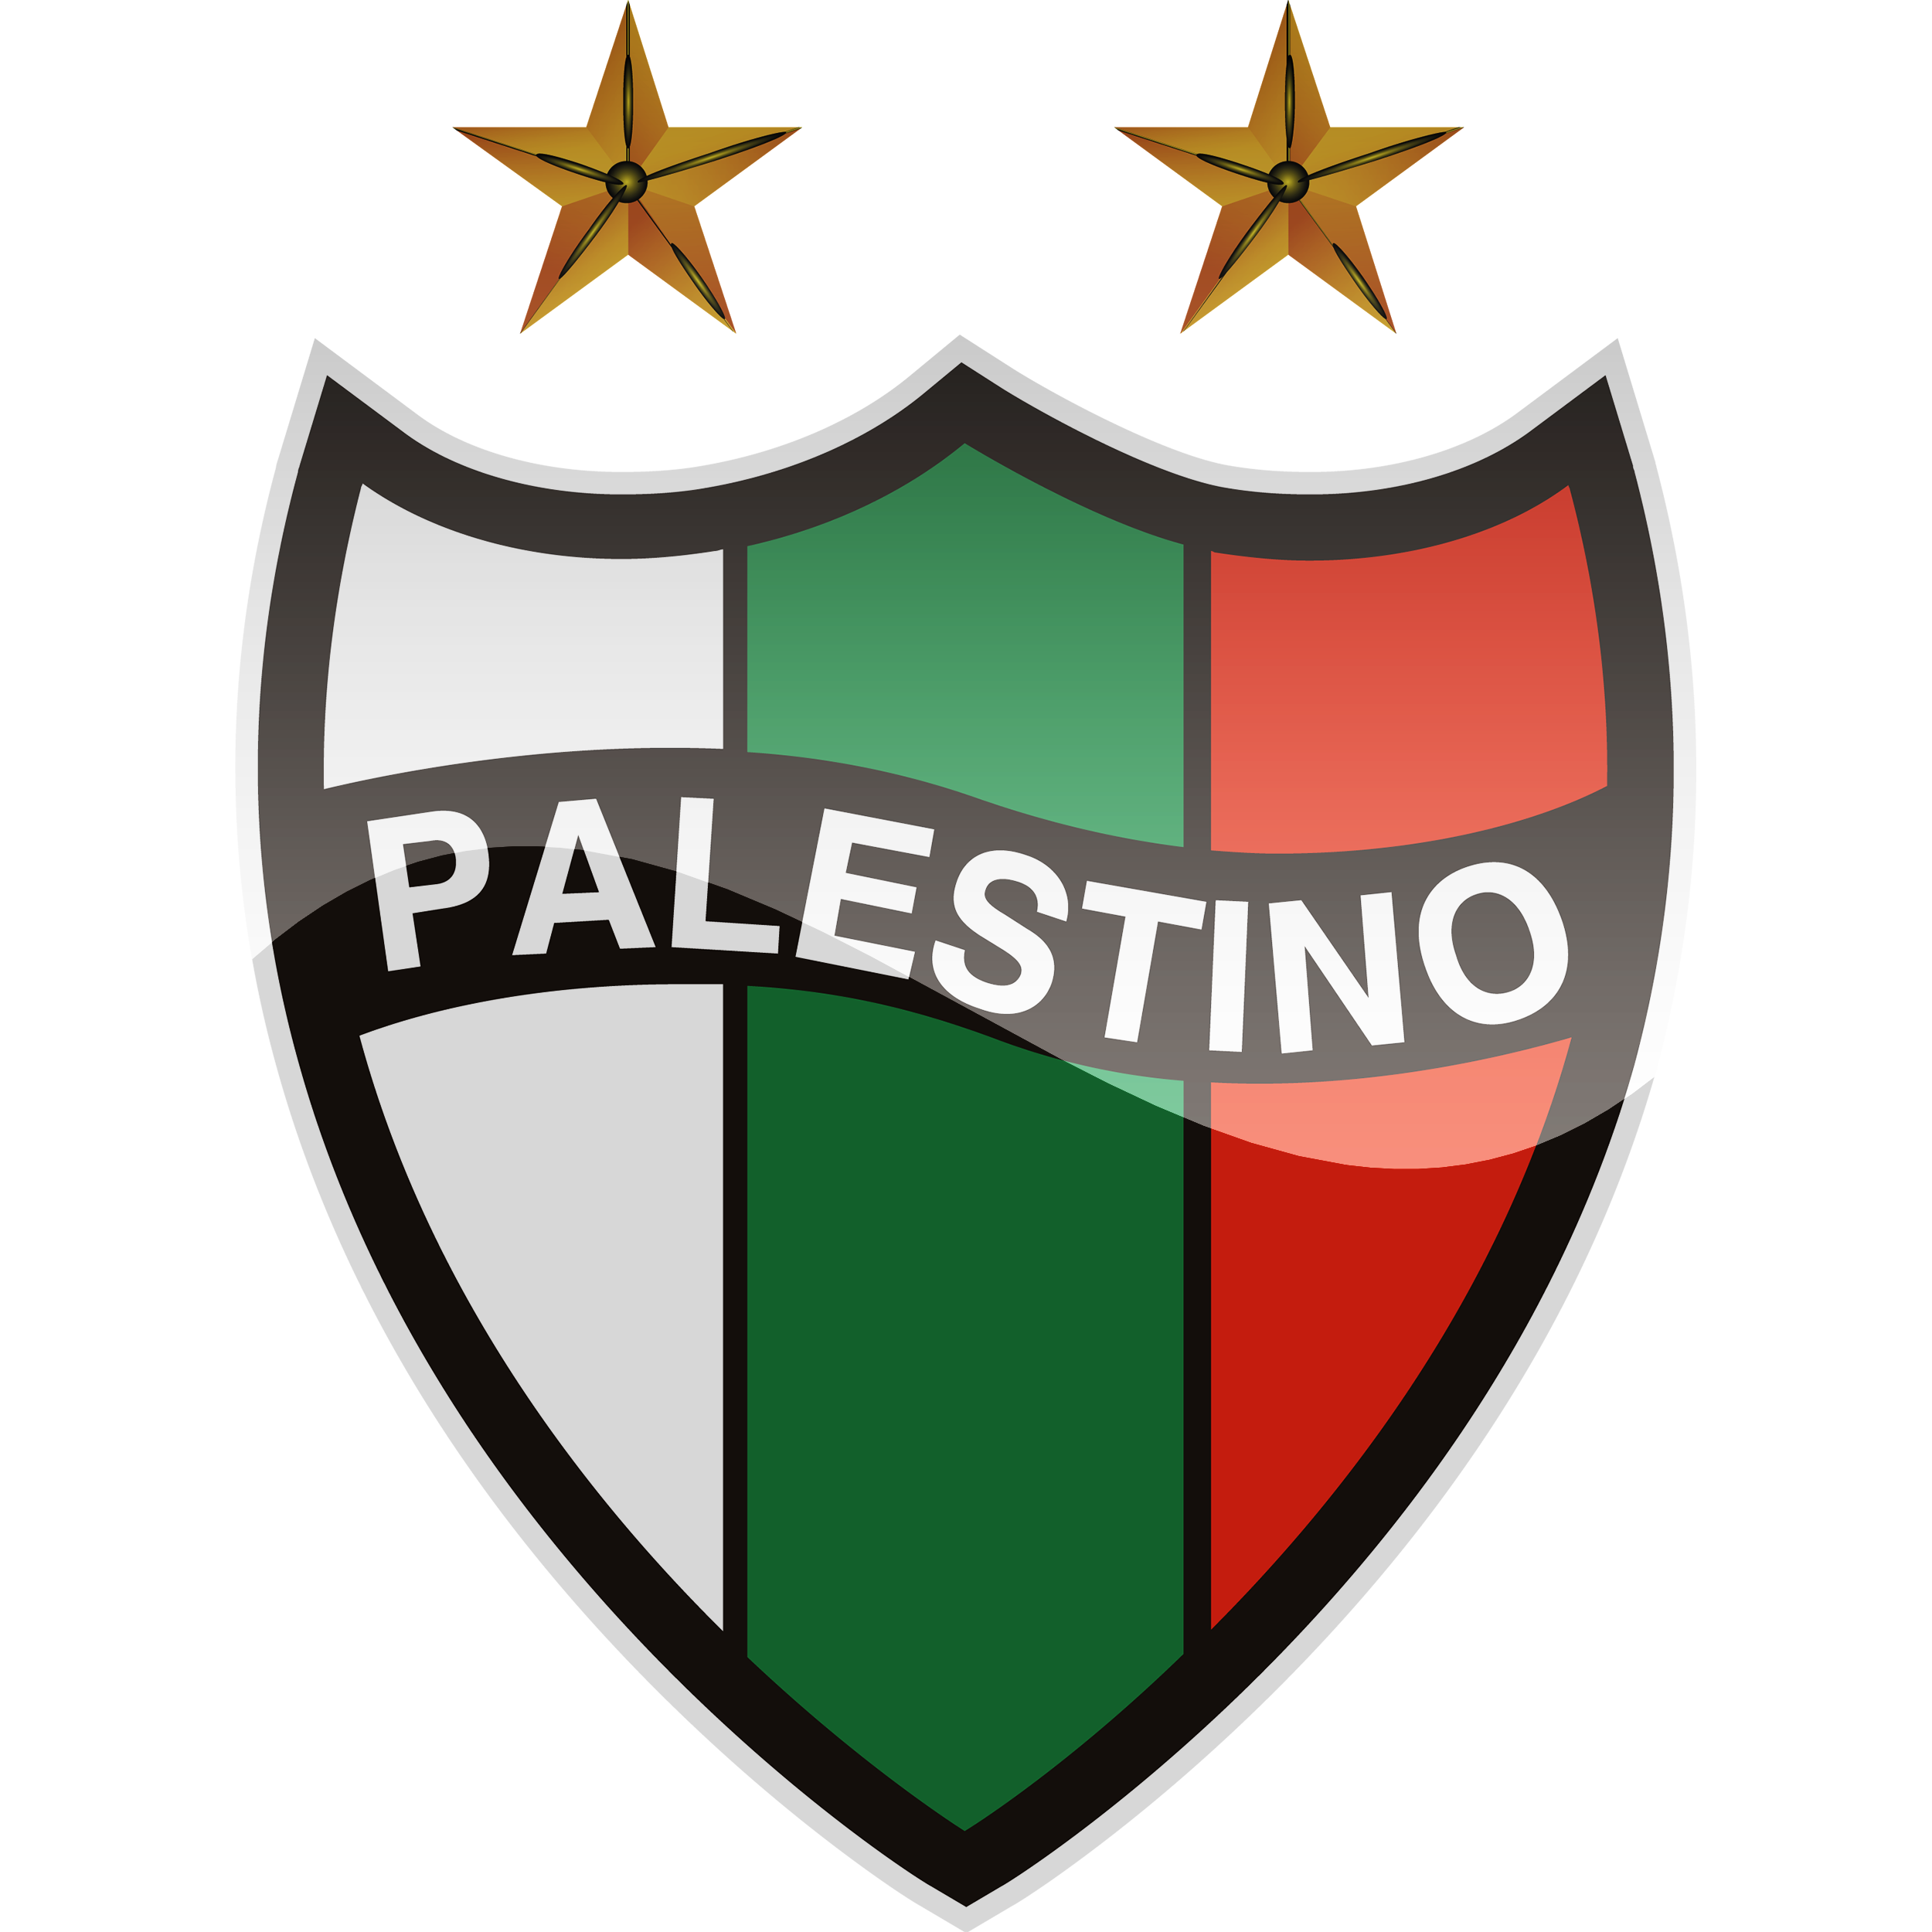 Cobresal vs Palestino Prediction: We expect goals from both sides